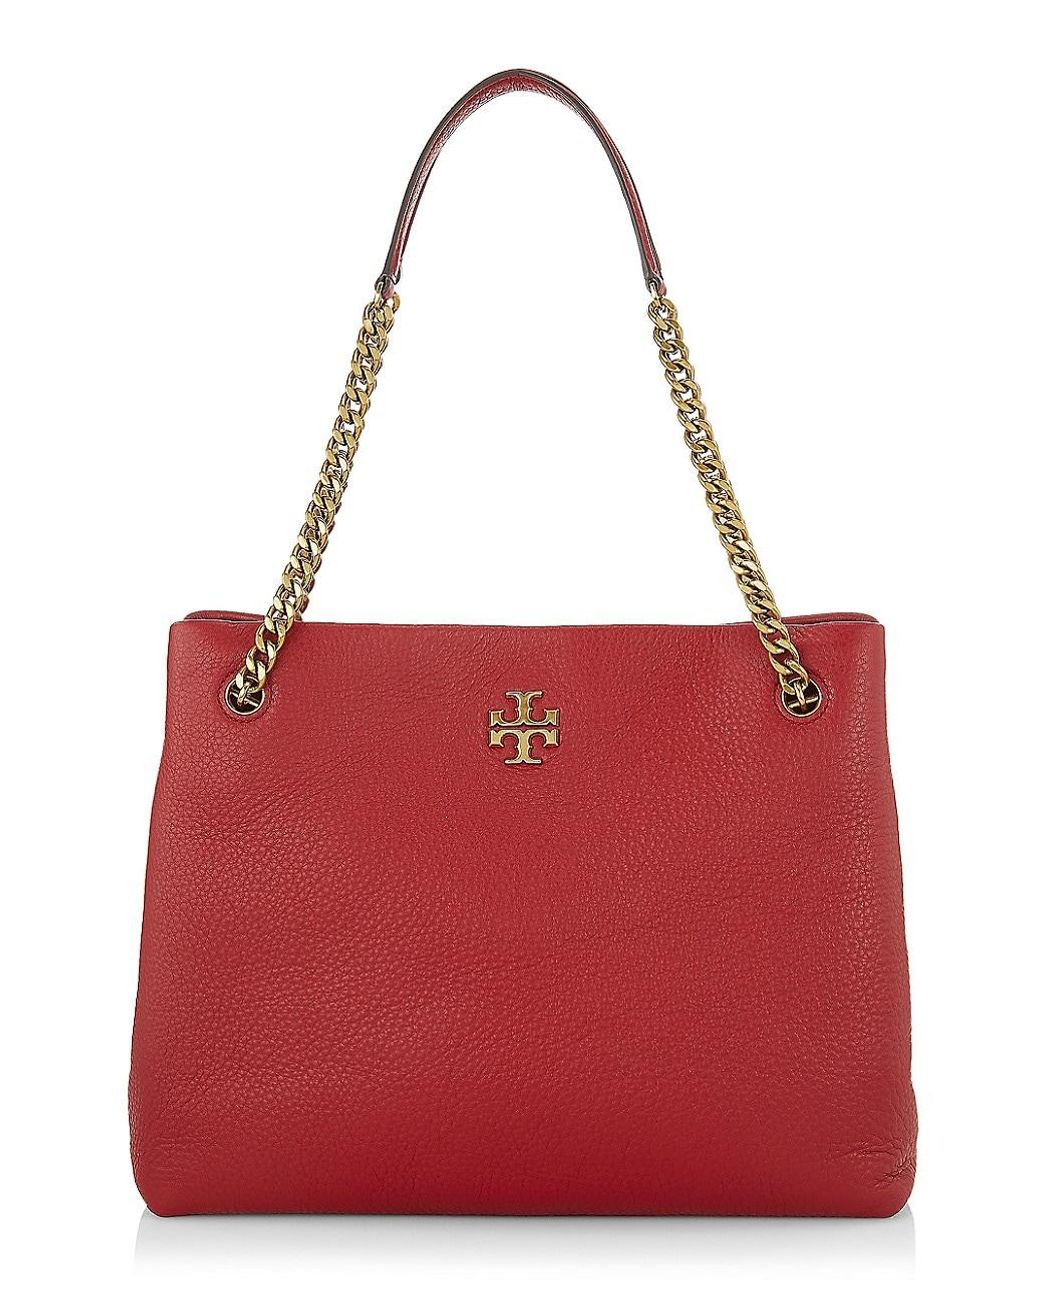 Tory Burch Bags | Tory Burch Kira Leather Tote | Color: Red | Size: Large | Pm-19306411's Closet